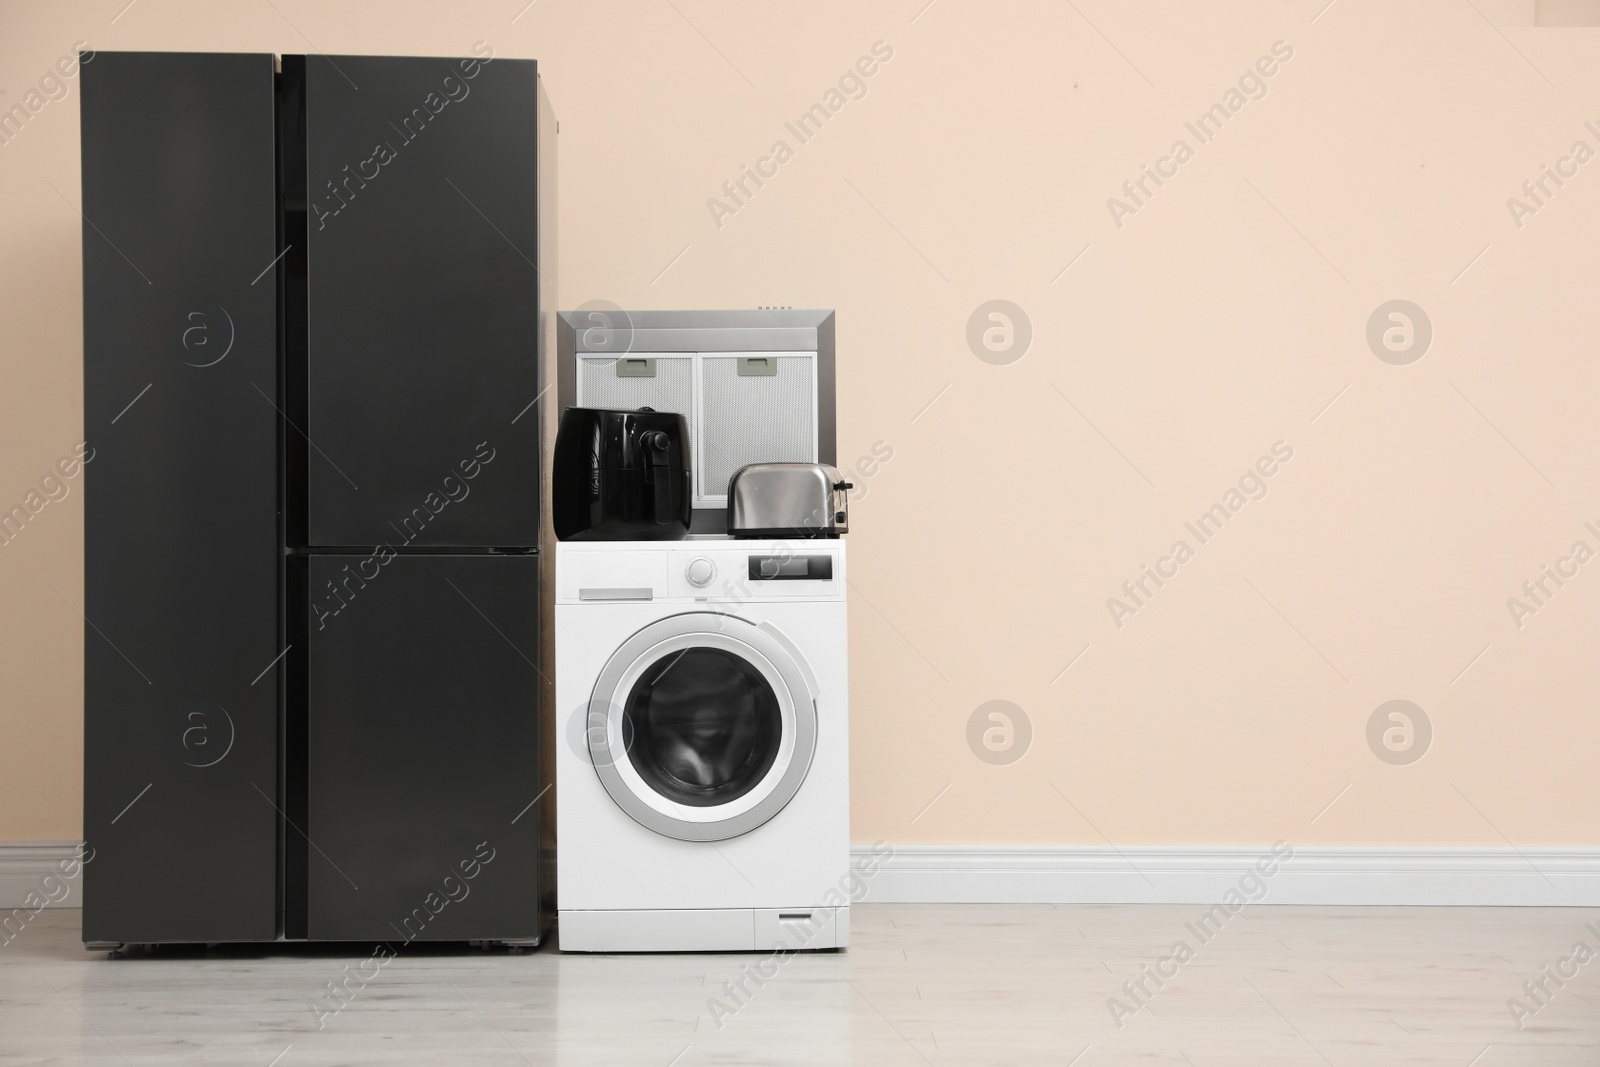 Photo of Modern refrigerator and other household appliances near beige wall indoors, space for text